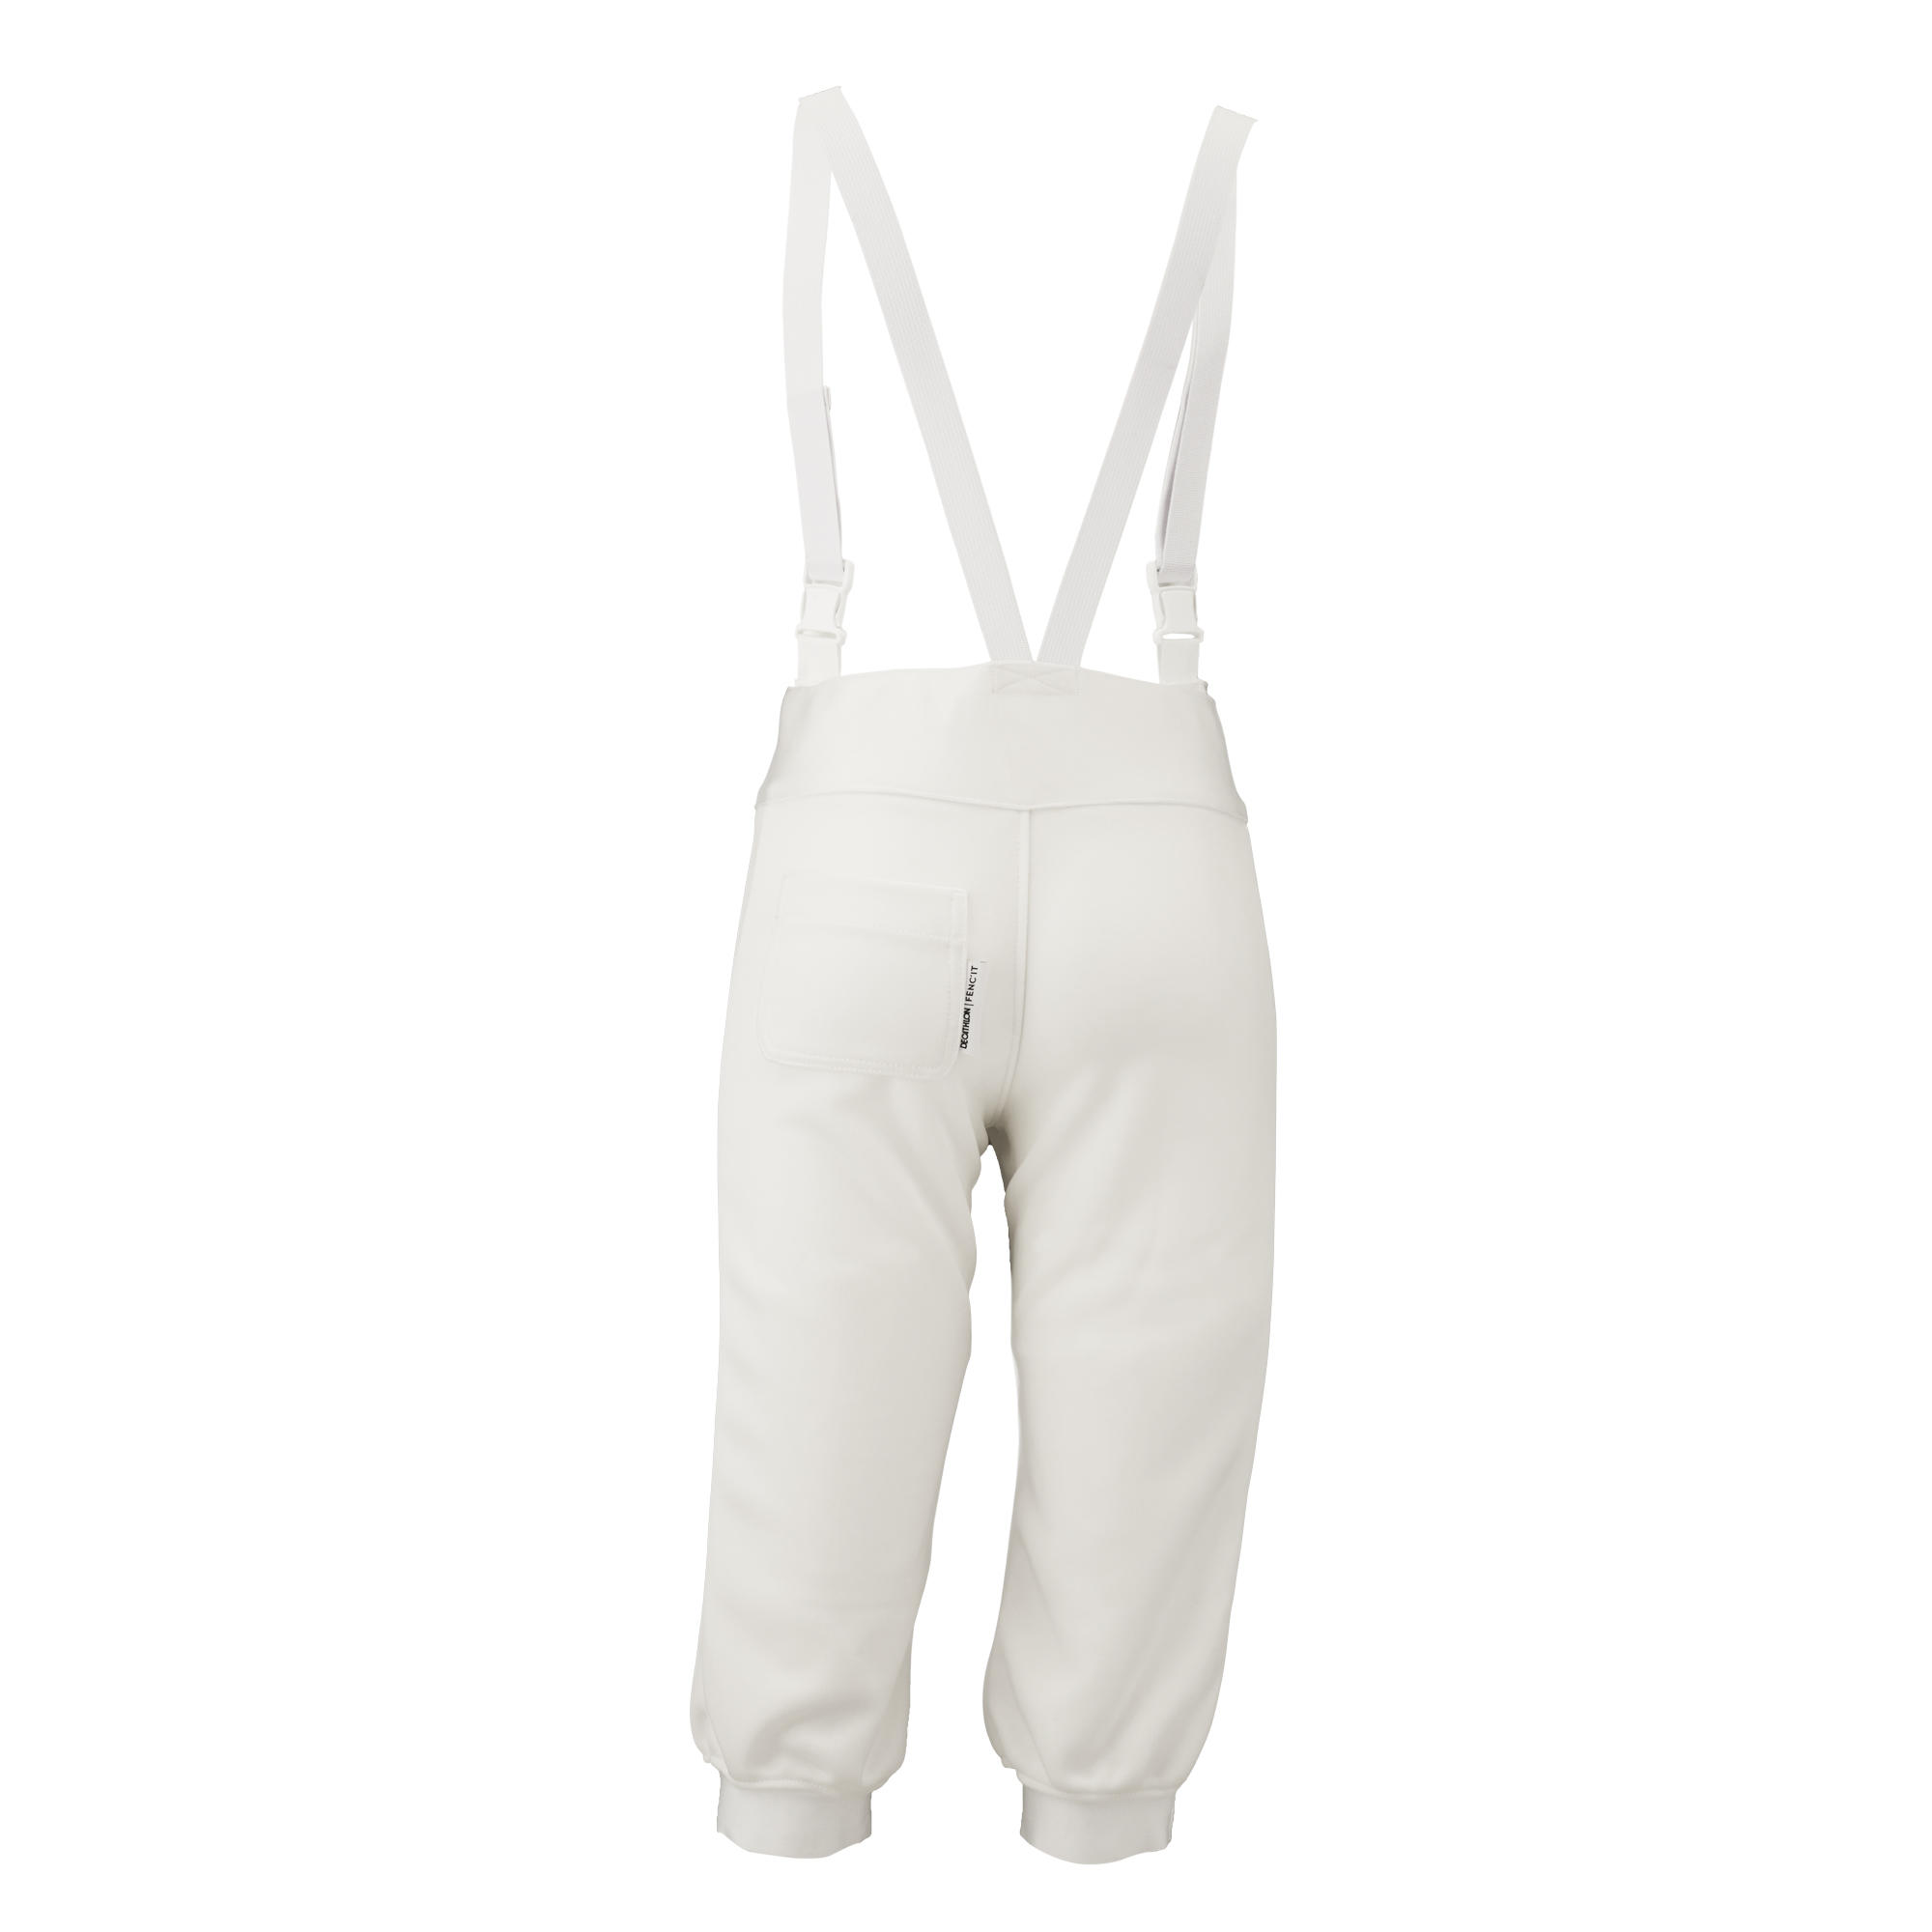 FENC'IT 350N Kids' Right-Handed Fencing Breeches